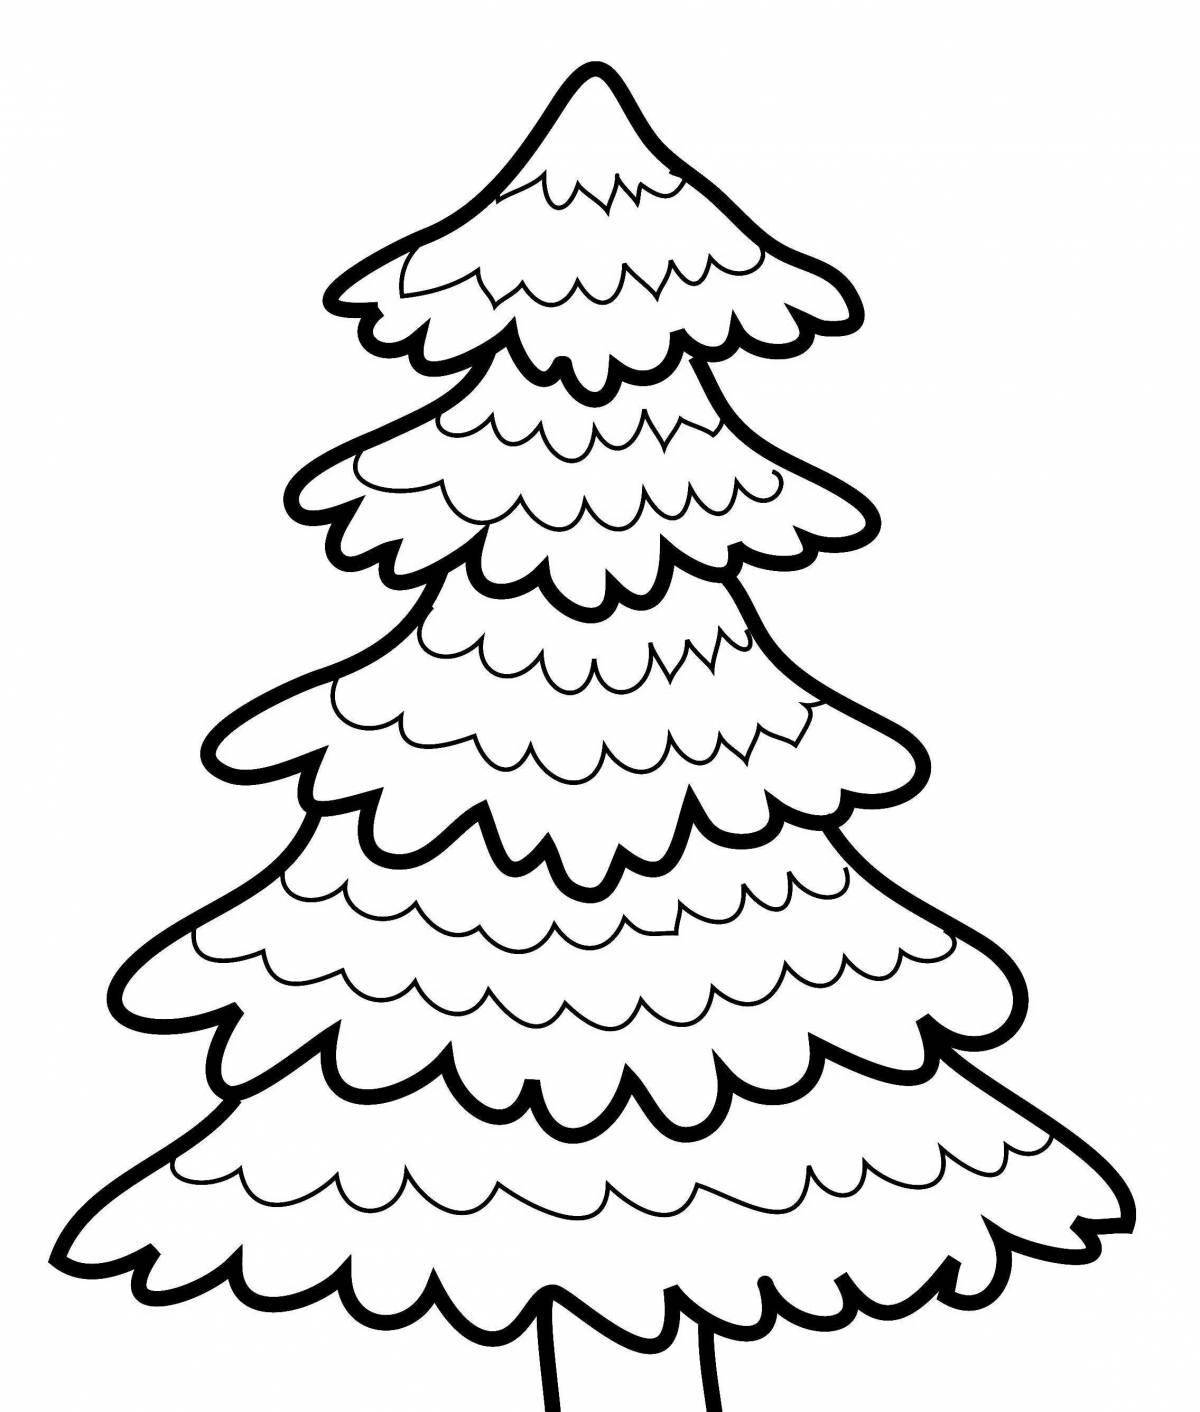 Coloring fat little Christmas tree